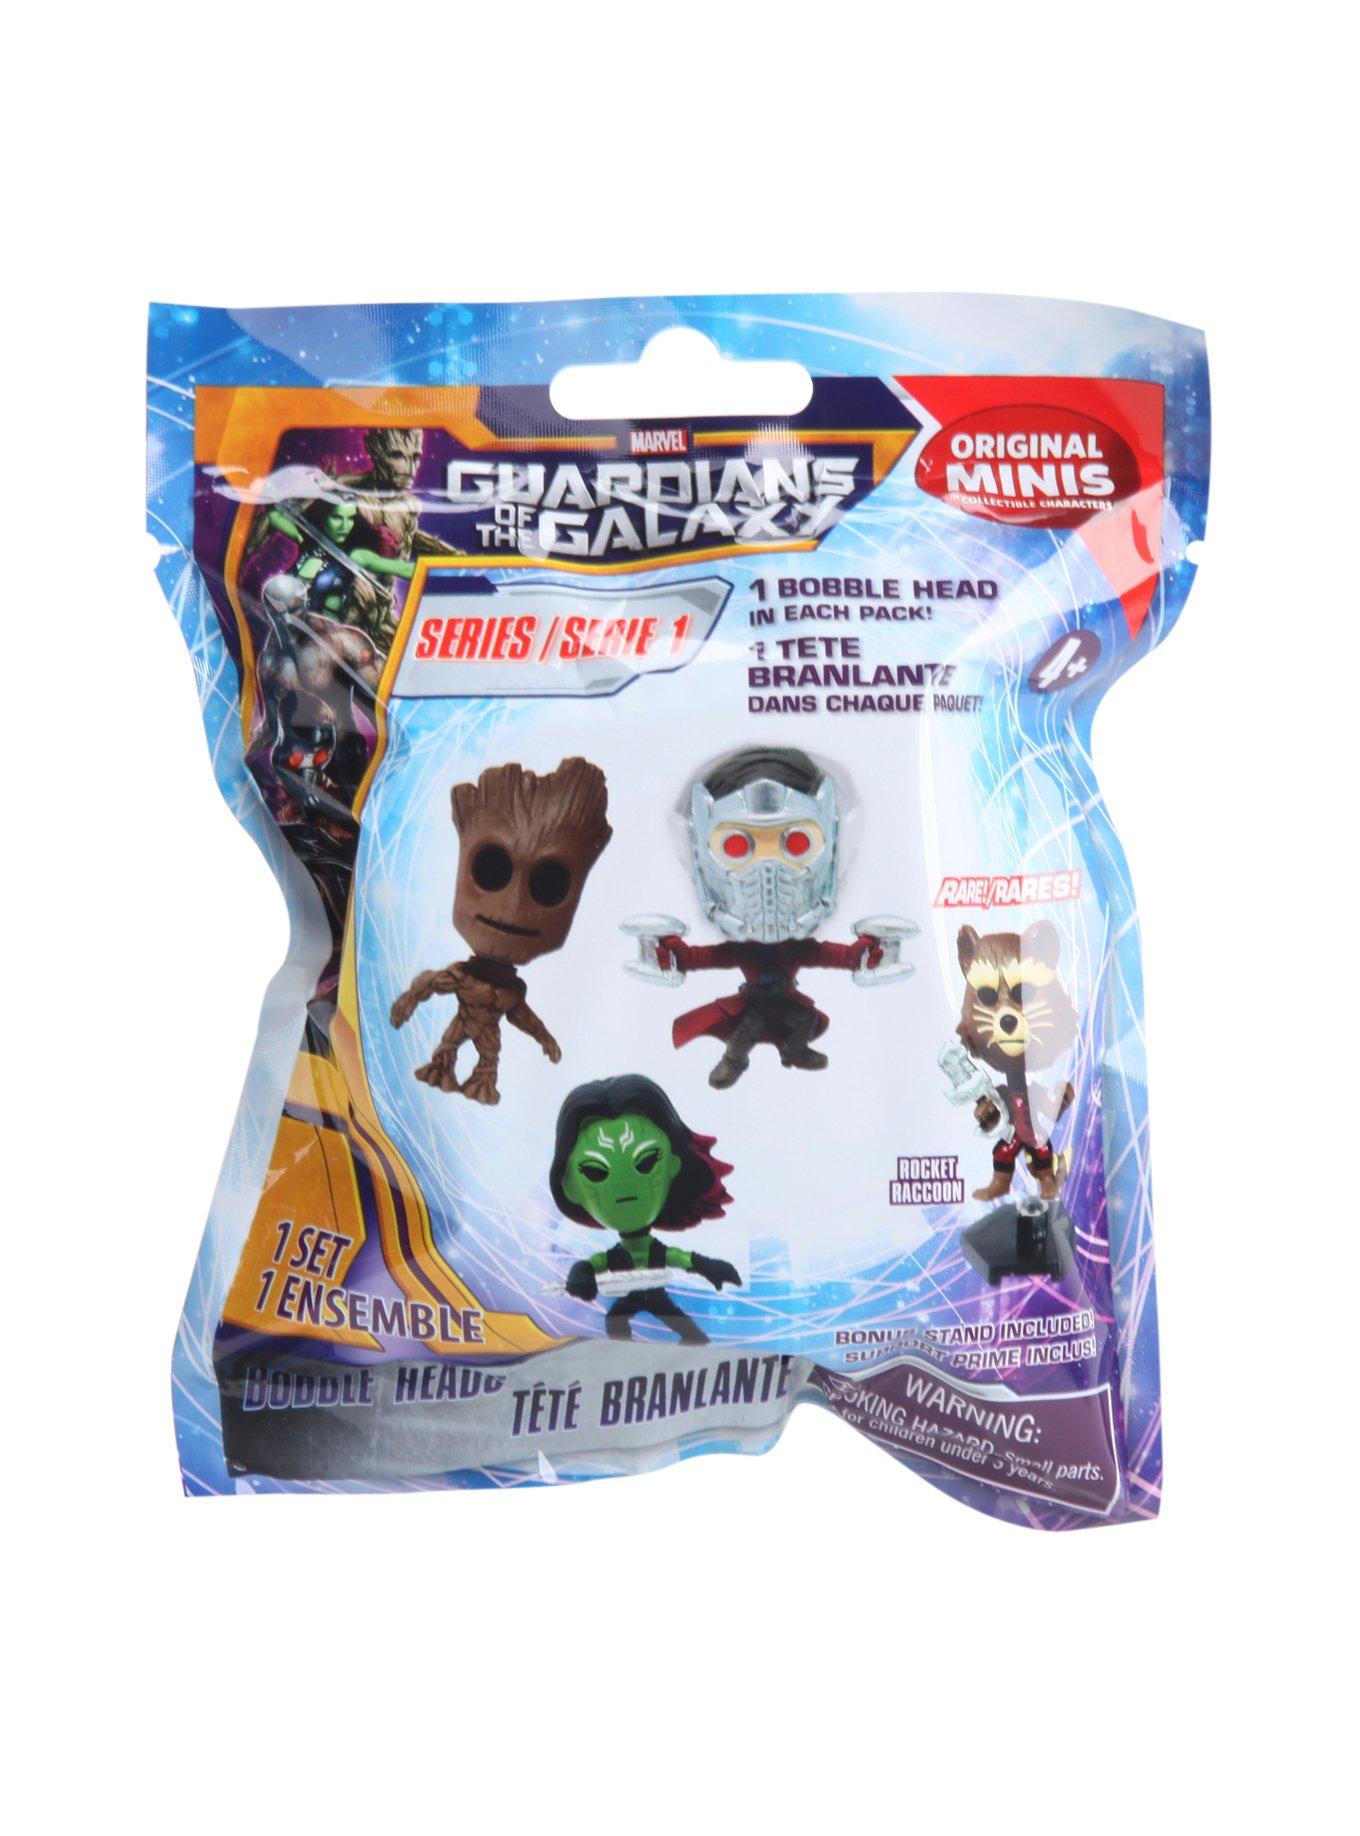 Marvel Guardians Of The Galaxy Original Minis Blind Bag Figure | Hot Topic